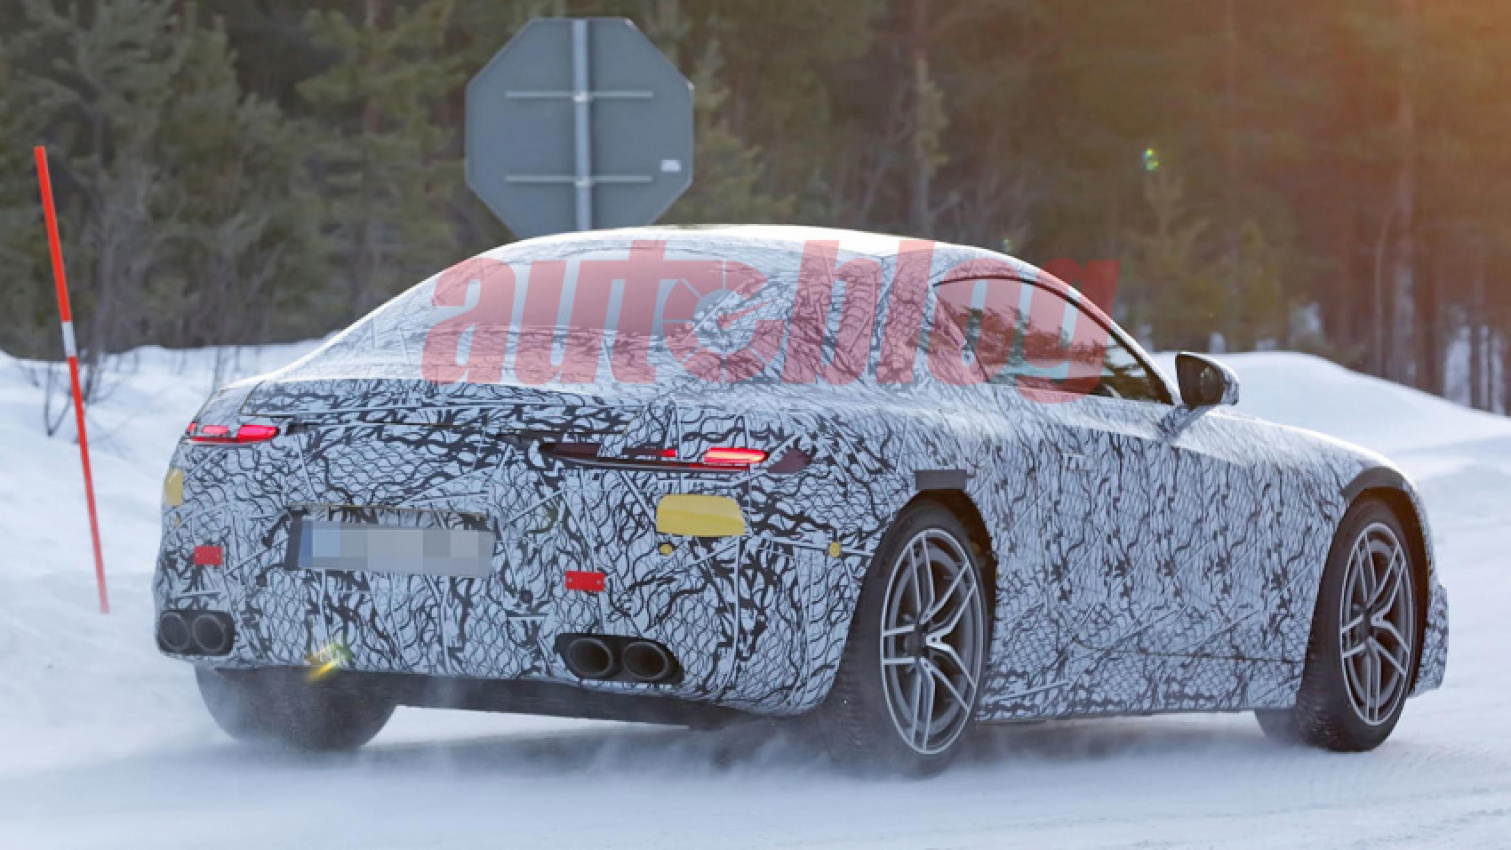 autos, cars, mercedes-benz, mg, coupe, luxury, mercedes, performance, spy photos, next-gen mercedes-amg gt coupe spied for the first time